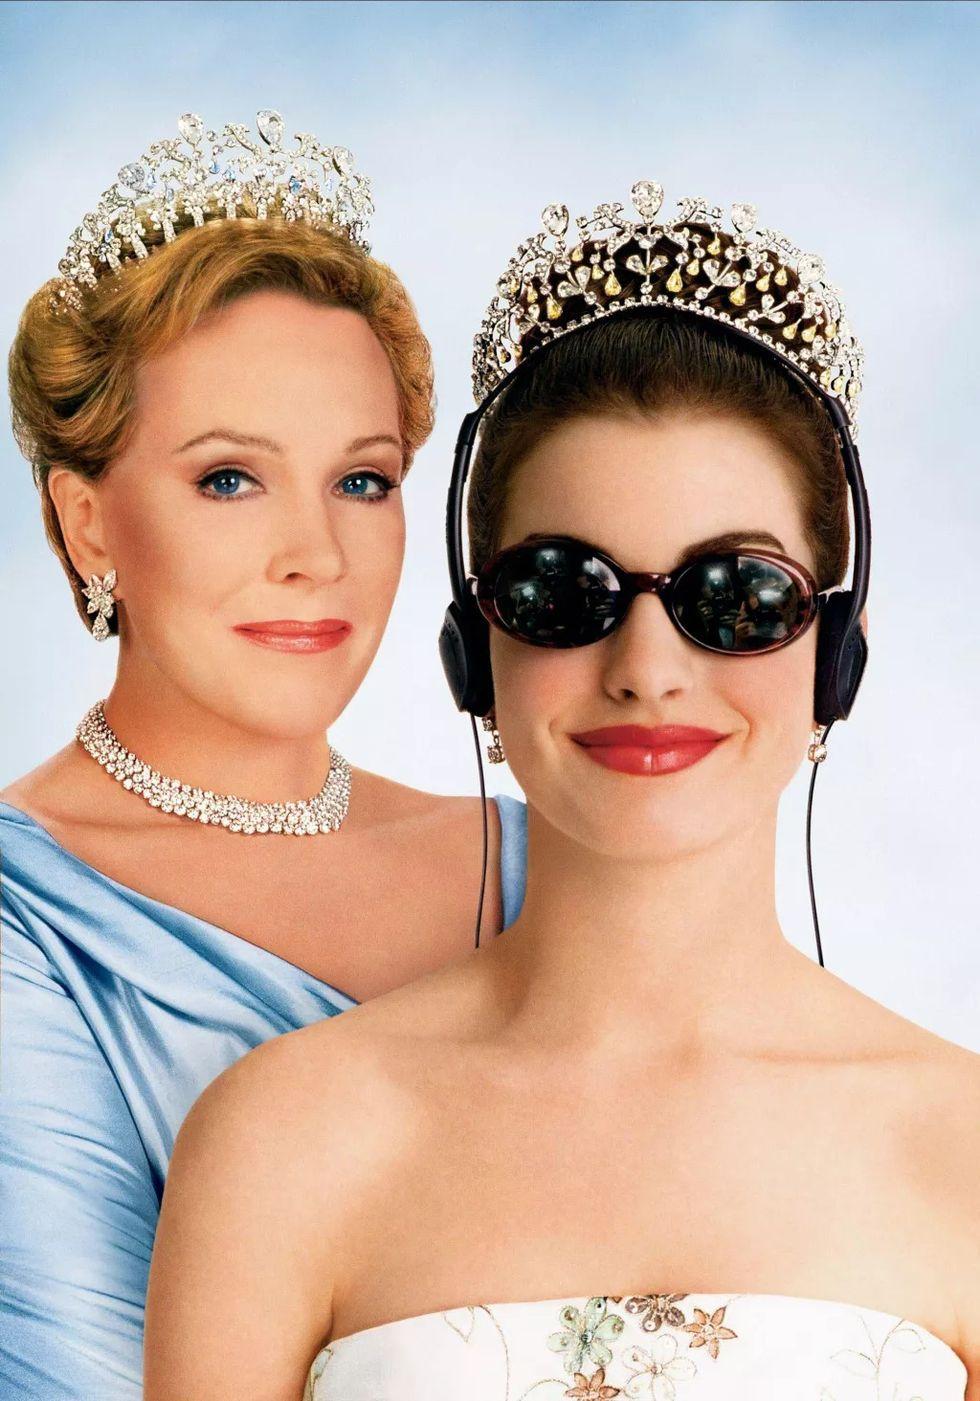 Recreating the iconic Princess Mia Thermopolis Amelia Mignonette Grimaldi Thermopolis Renaldo aka Mia's look should be a breeze. All you need is a white dress, a pair of sunglasses and a trusty tiara and you're set!